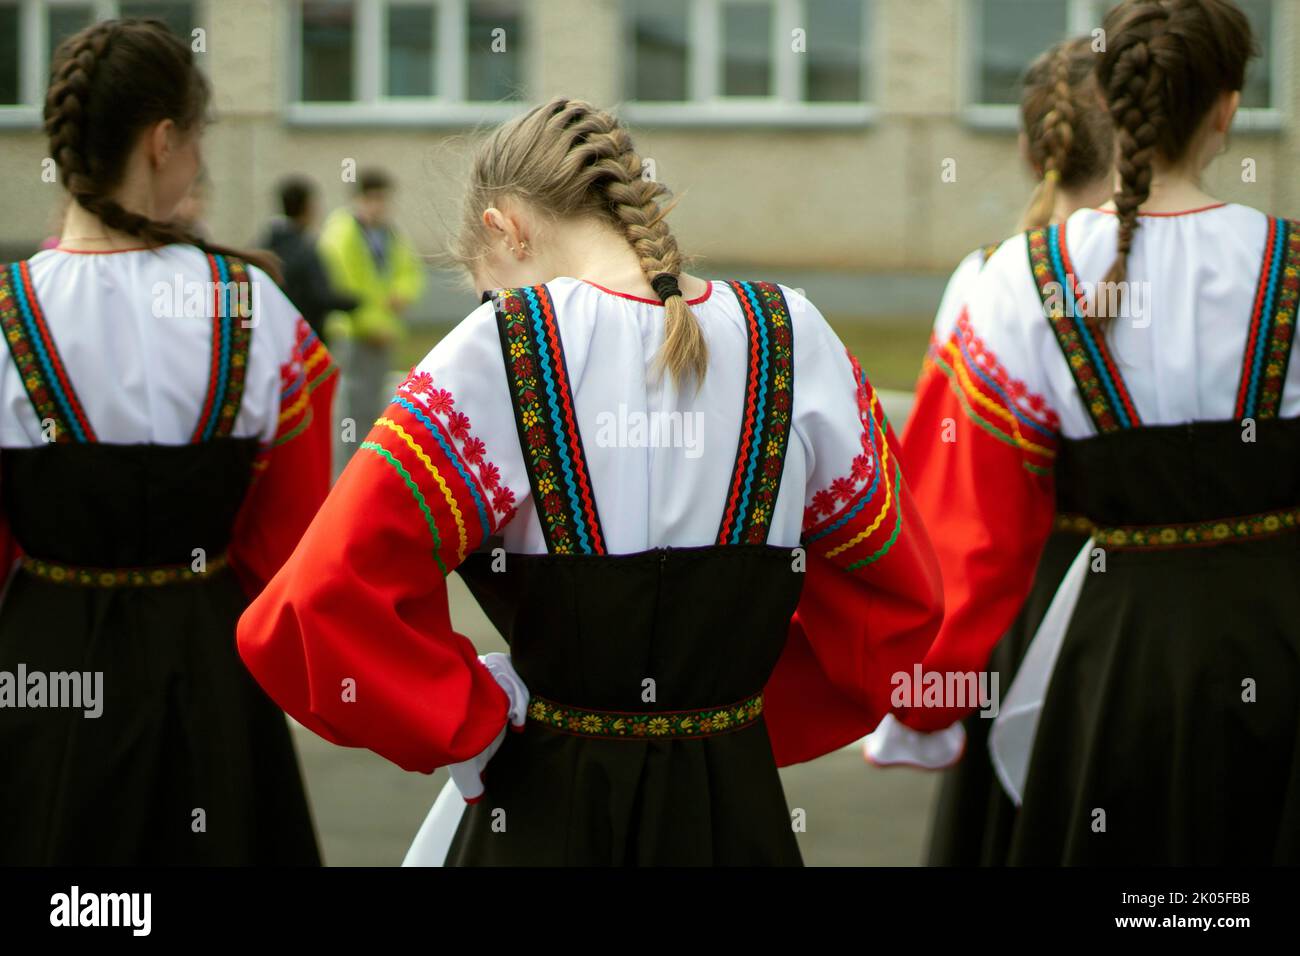 Girl in Russia in folk dress. Preparation for dance. Children perform on street with theatrical number. Folk style of clothing. Stock Photo